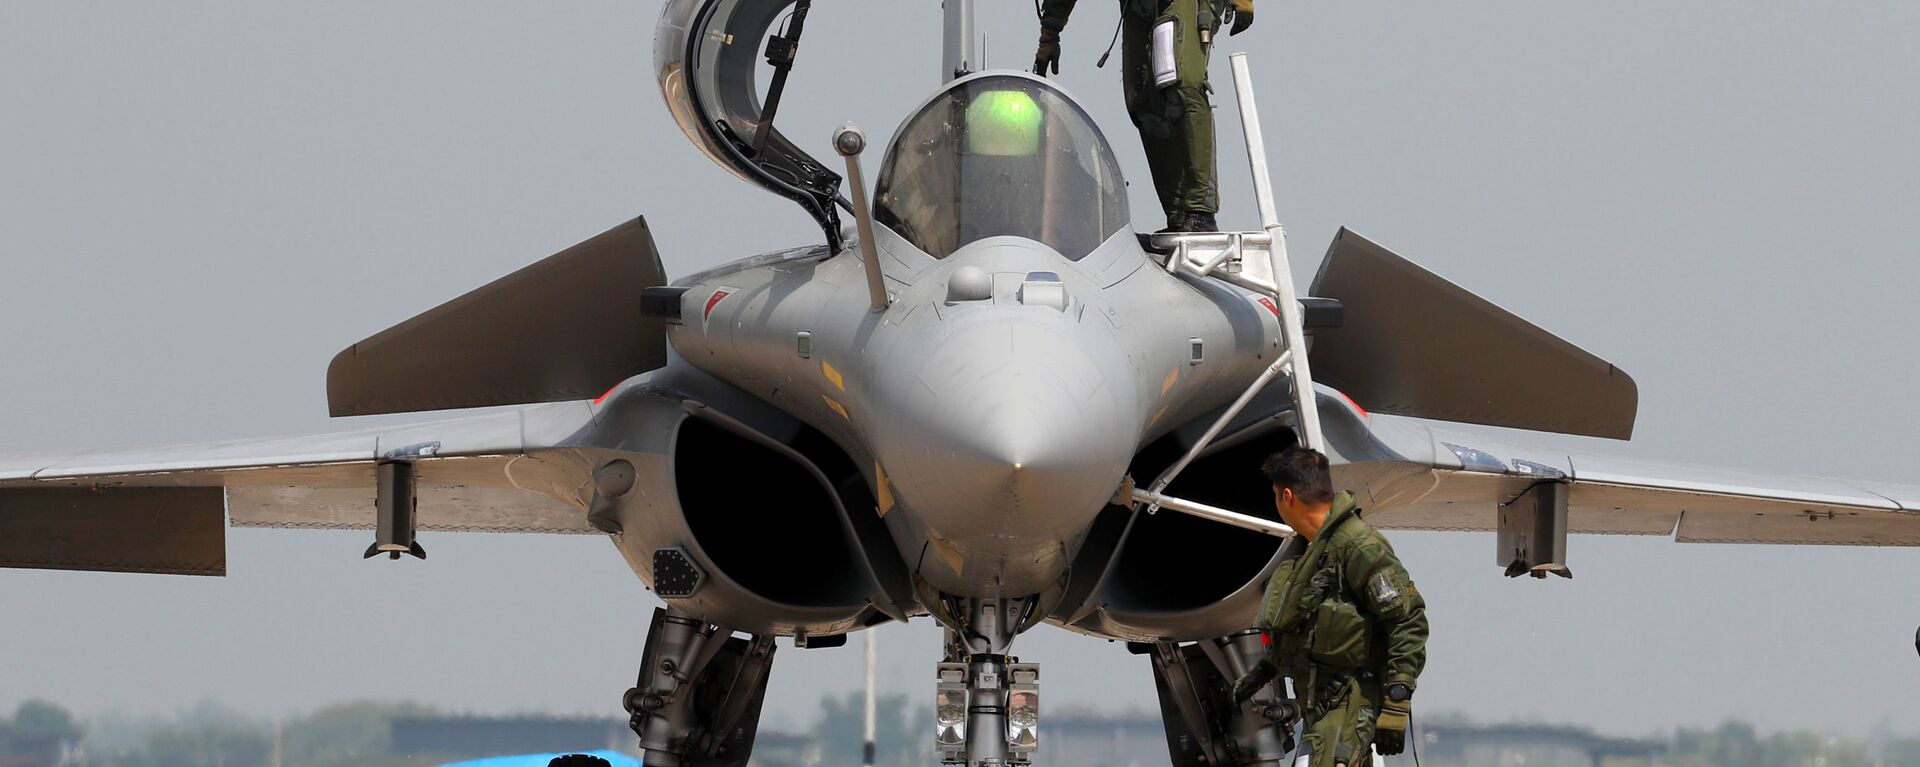 An Indian Air Force pilot gets out of a Rafale fighter jet during its induction ceremony at an air force station in Ambala, India, September 10, 2020 - Sputnik International, 1920, 17.12.2021